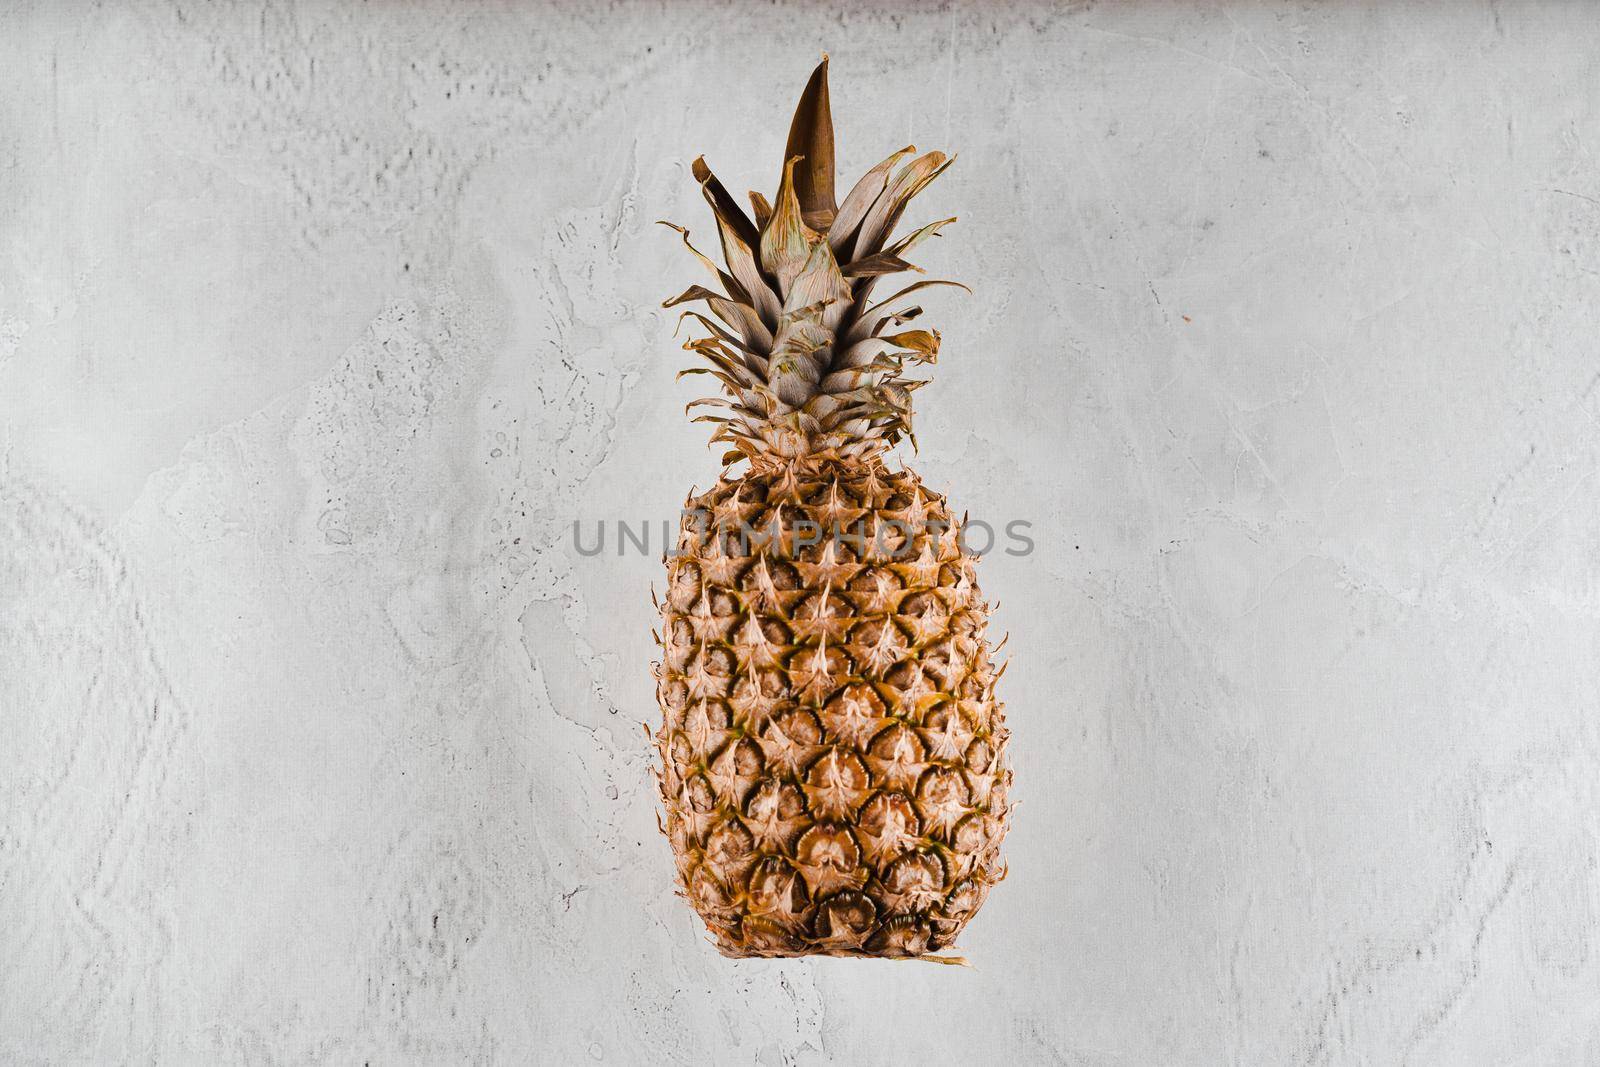 Pineapple tropical fruit on white stone background background. Citrus fruit with vitamin c for helth care